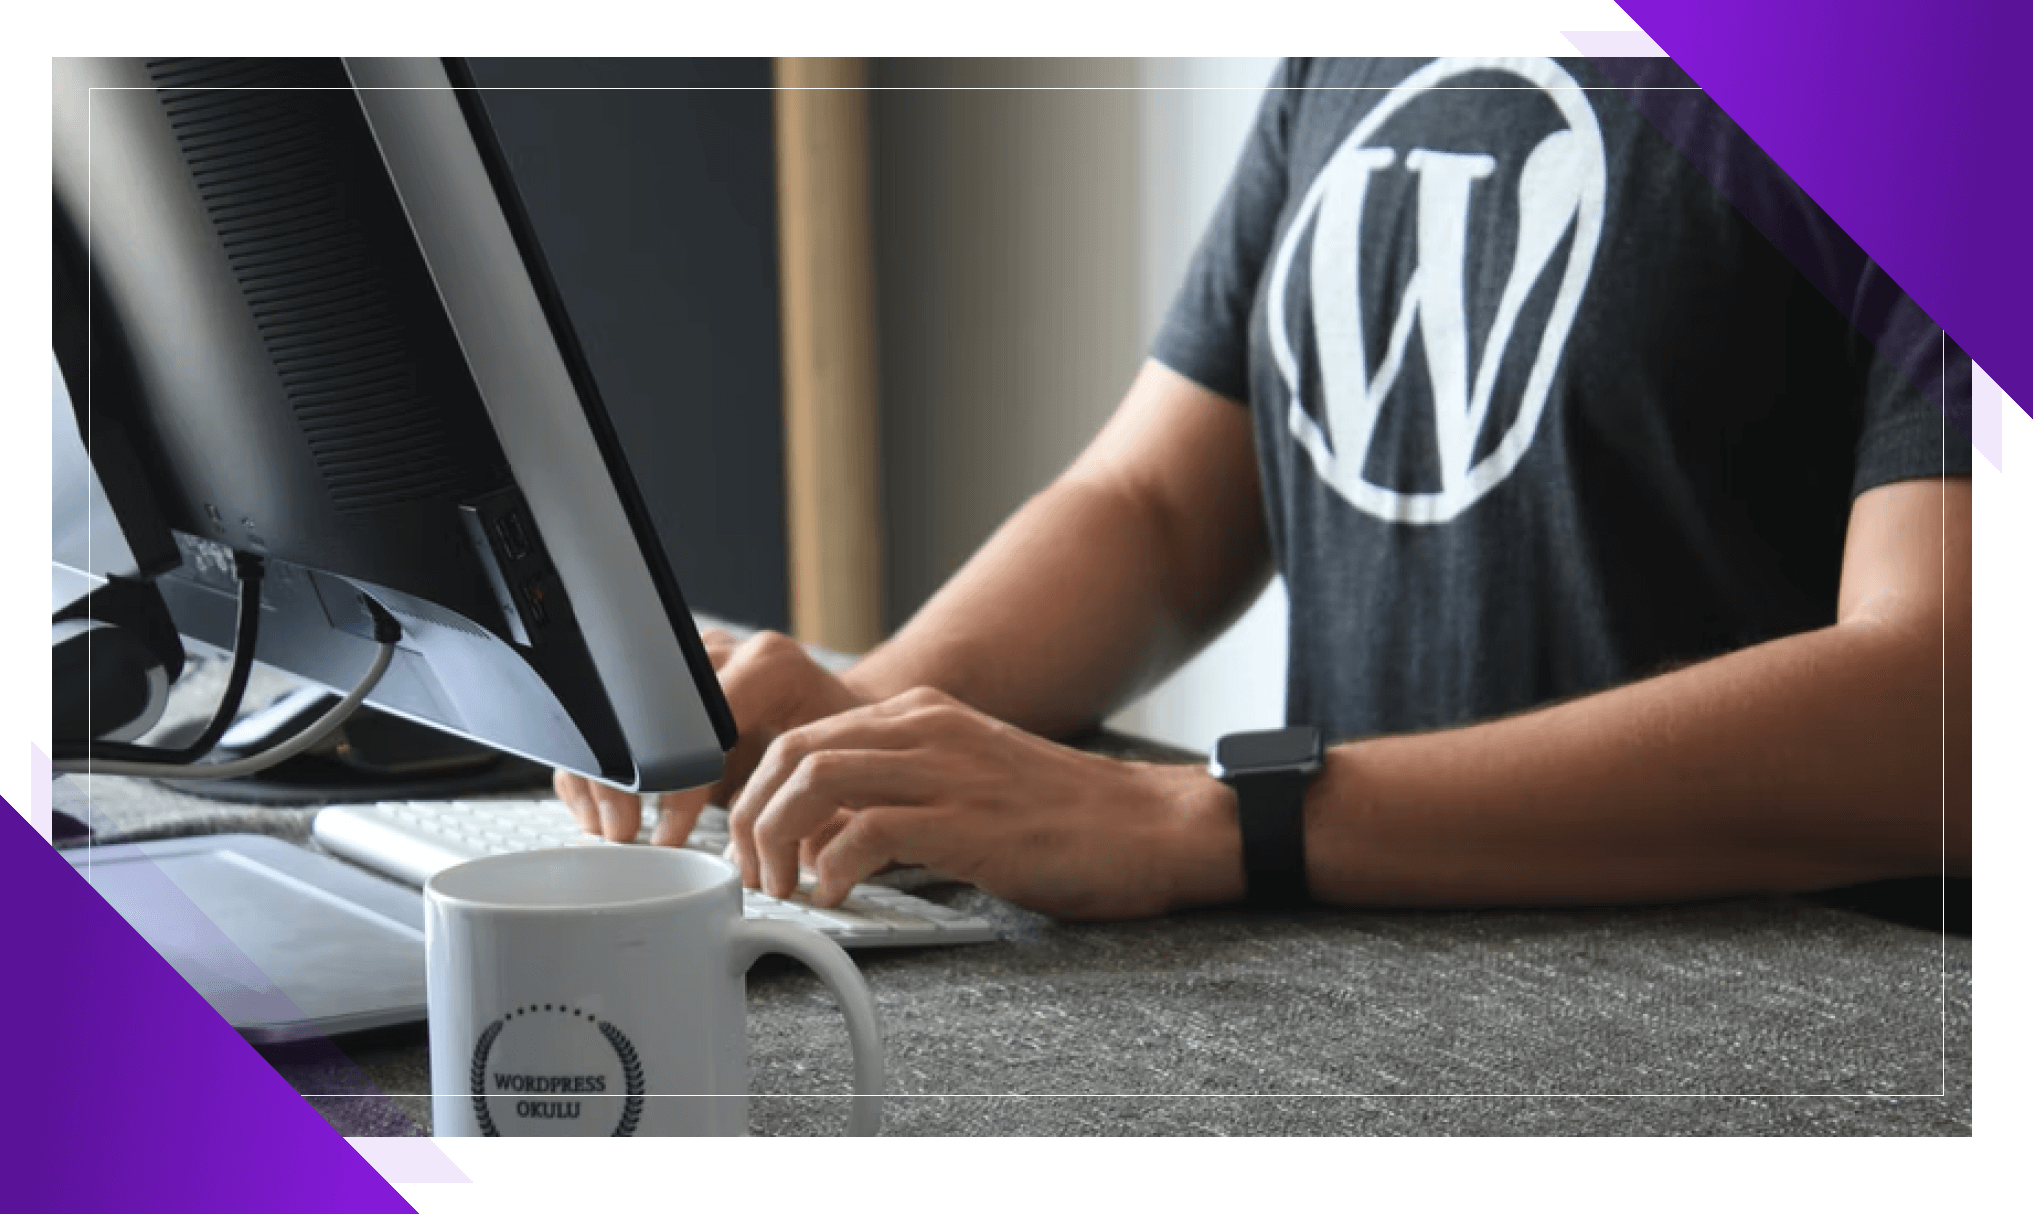 WordPress-Web-Design-Trends-You-Need-to-Know-for-2022_1